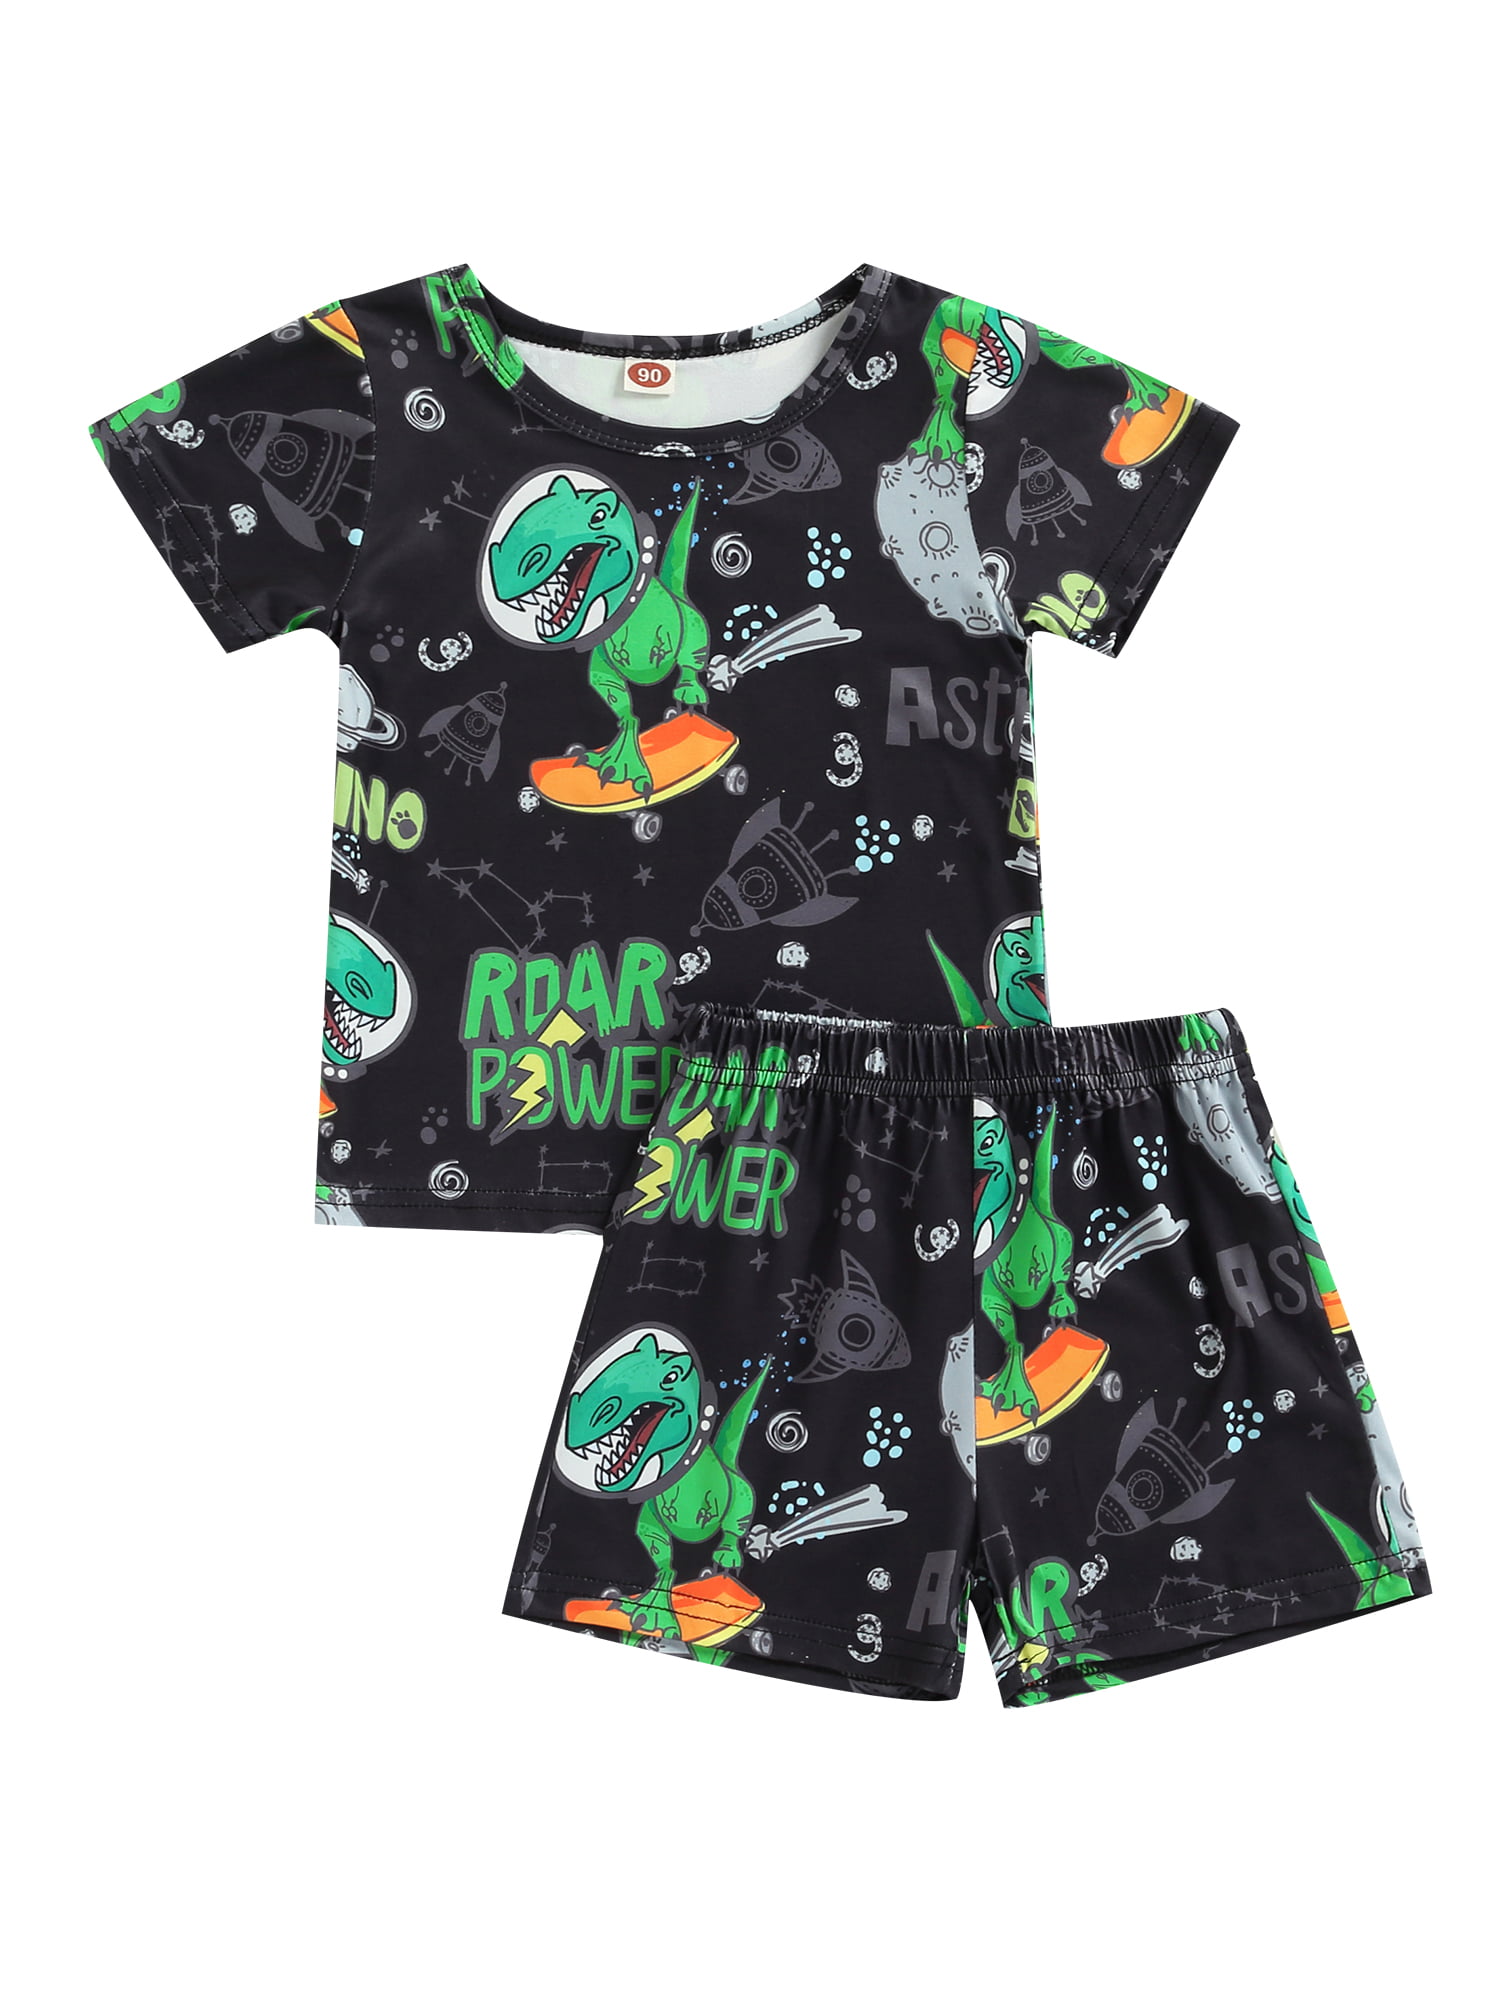 0-7T Toddler Kids Baby Boys Layette Sets Cartoon Dinosaur Camouflage Short Sleeve Shirt Pants Outfits Comfy Soft Pajamas 